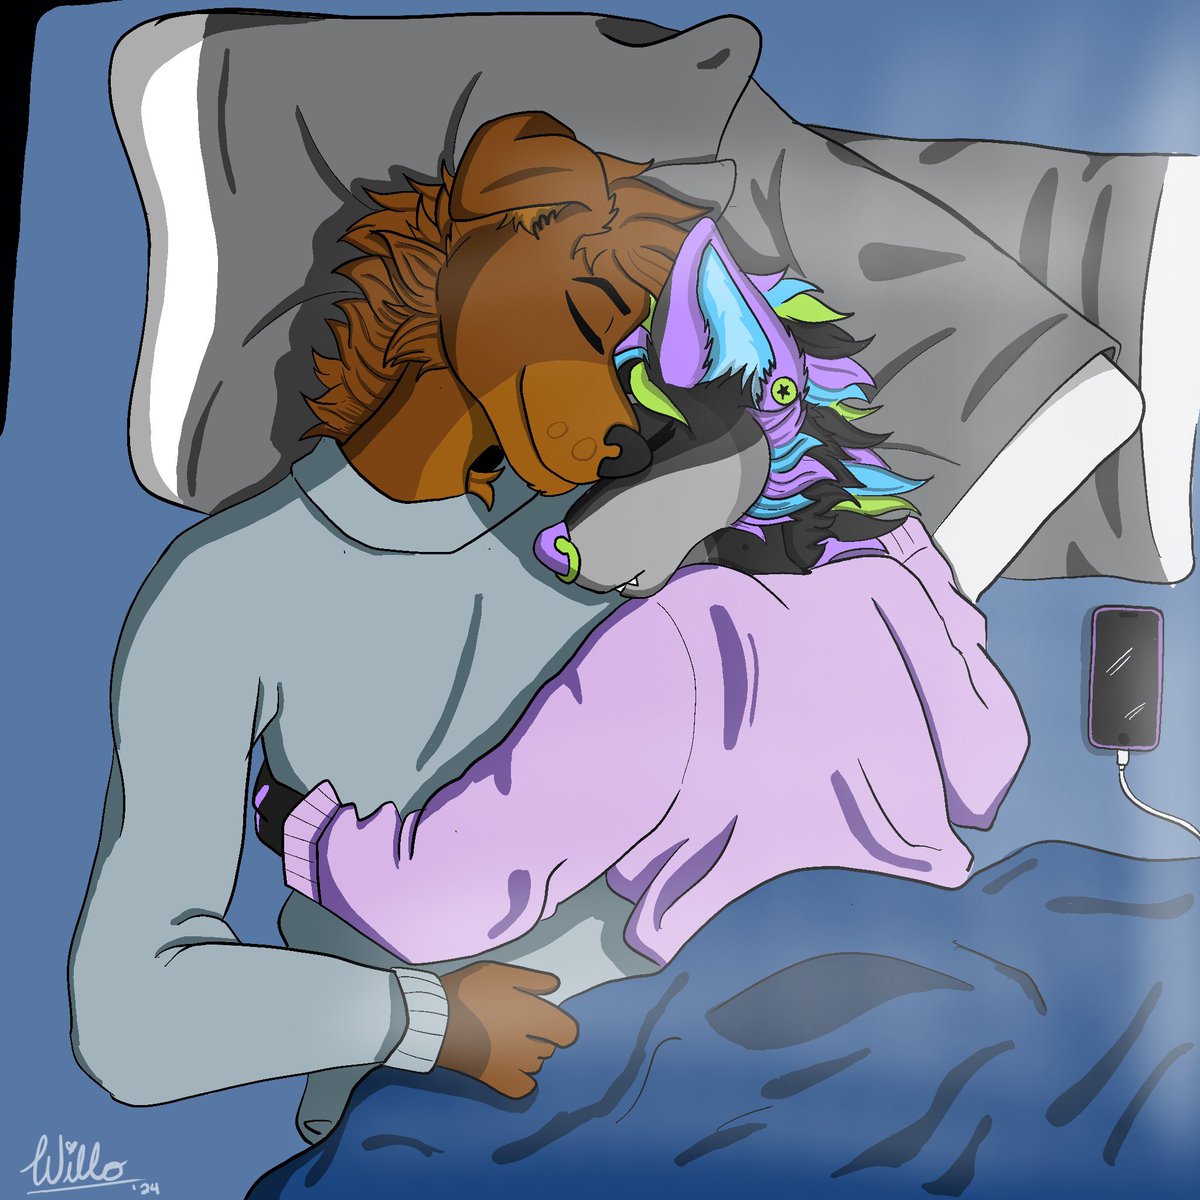 Early Mornings like this with You are the best mornings~
🎨 by me feat my babe @DogDaysOfJack 
#furry #love #furrylove #furries #fursuit #furryart #furryartist